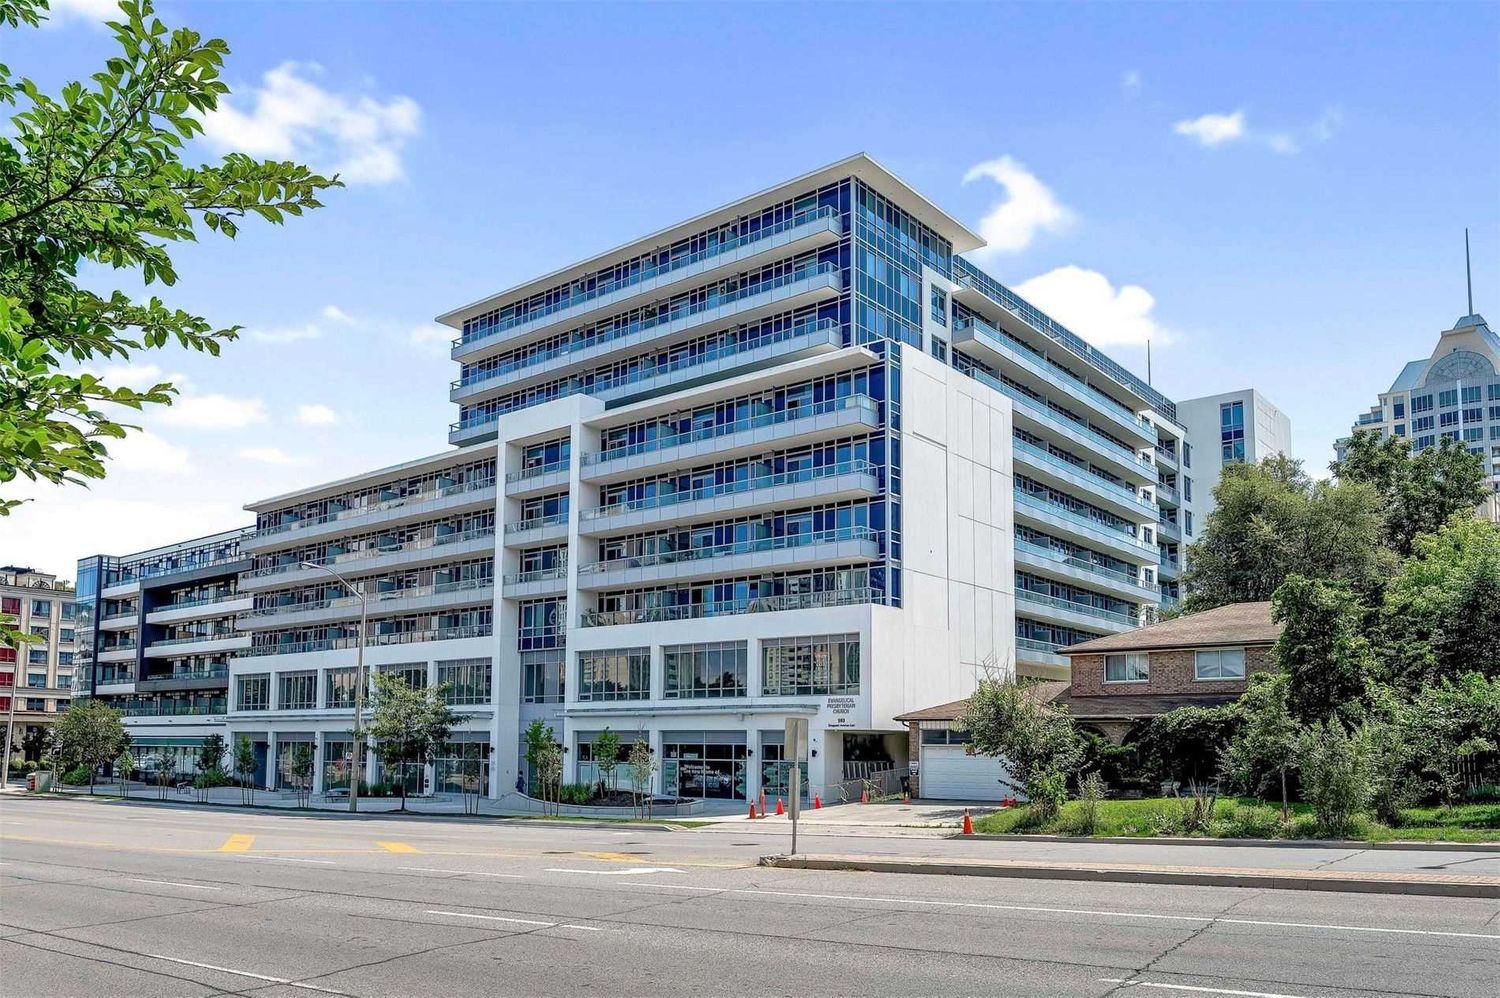 591 Sheppard Avenue E. The Village Residences is located in  North York, Toronto - image #1 of 2